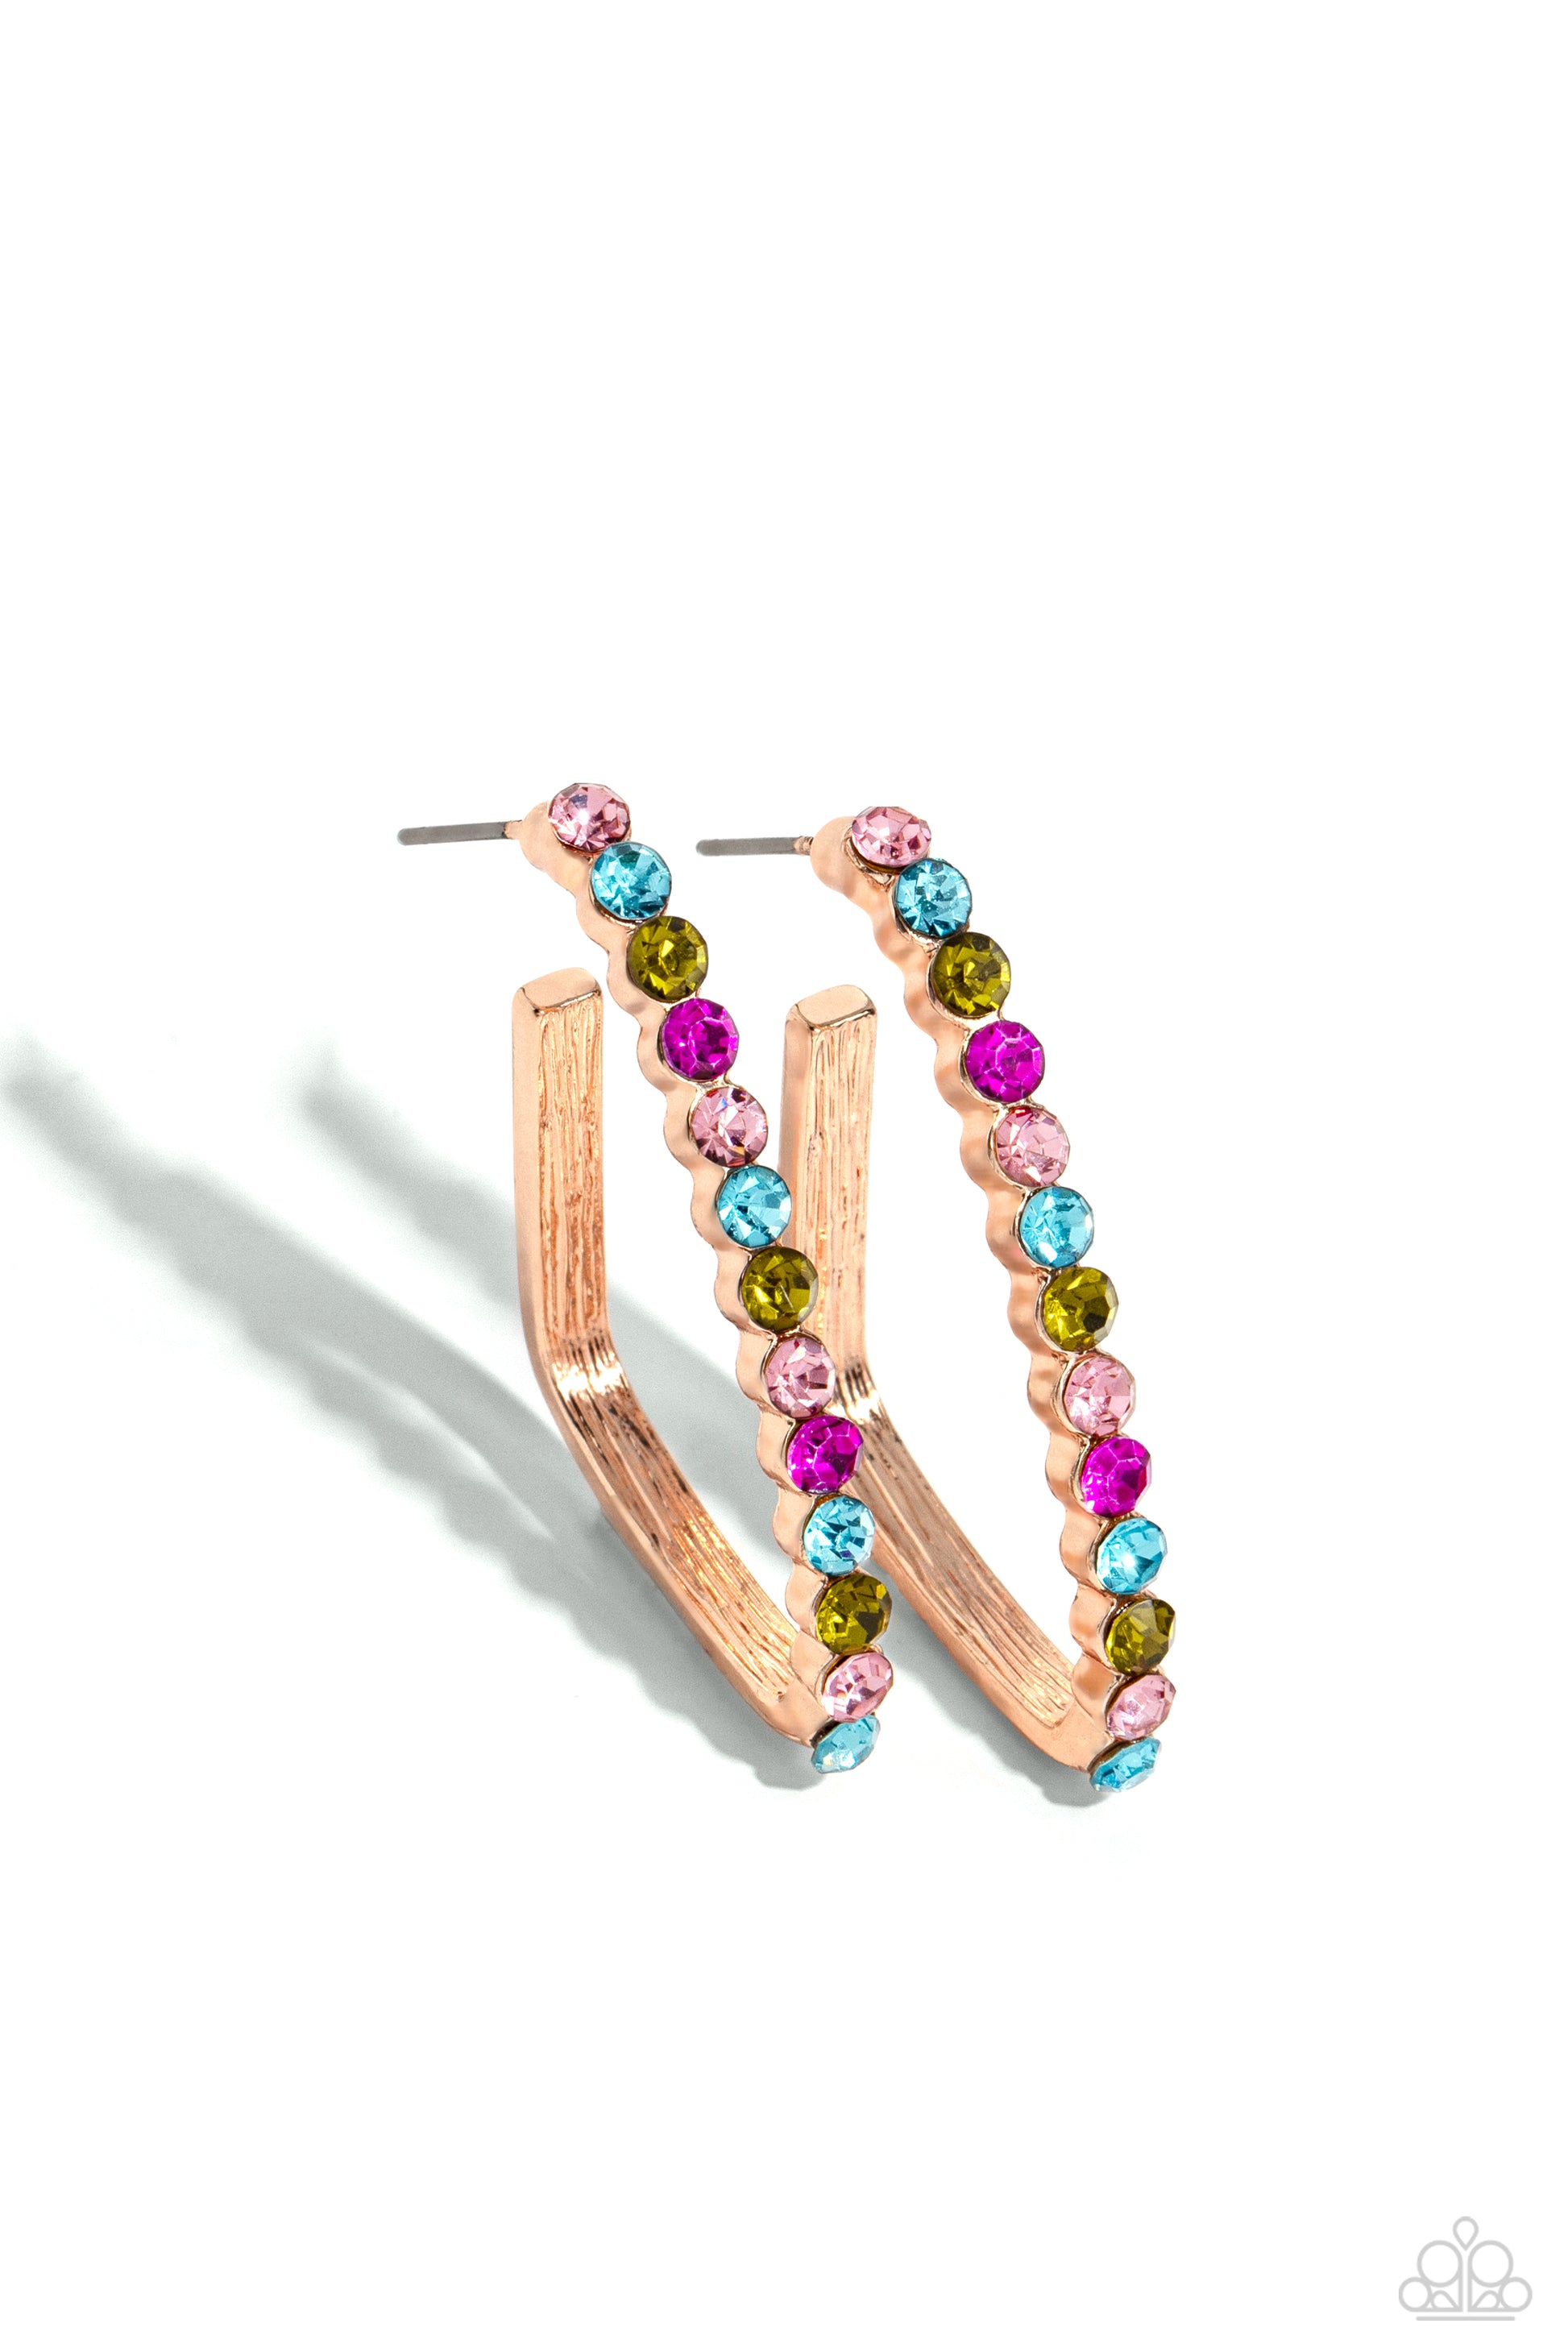 Triangular Tapestry Rose Gold Hoop Earring - Paparazzi Accessories  The front of a bold rose gold hoop is encrusted in multicolored rhinestones, creating a sparkly spectrum of color. The multicolored scalloped frame leisurely bends into an airy triangular frame for a geometric motif. Earring attaches to a standard post fitting. Hoop measures approximately 1/2" in diameter.  Sold as one pair of hoop earrings.  Sku:  P5HO-GDRS-319XX